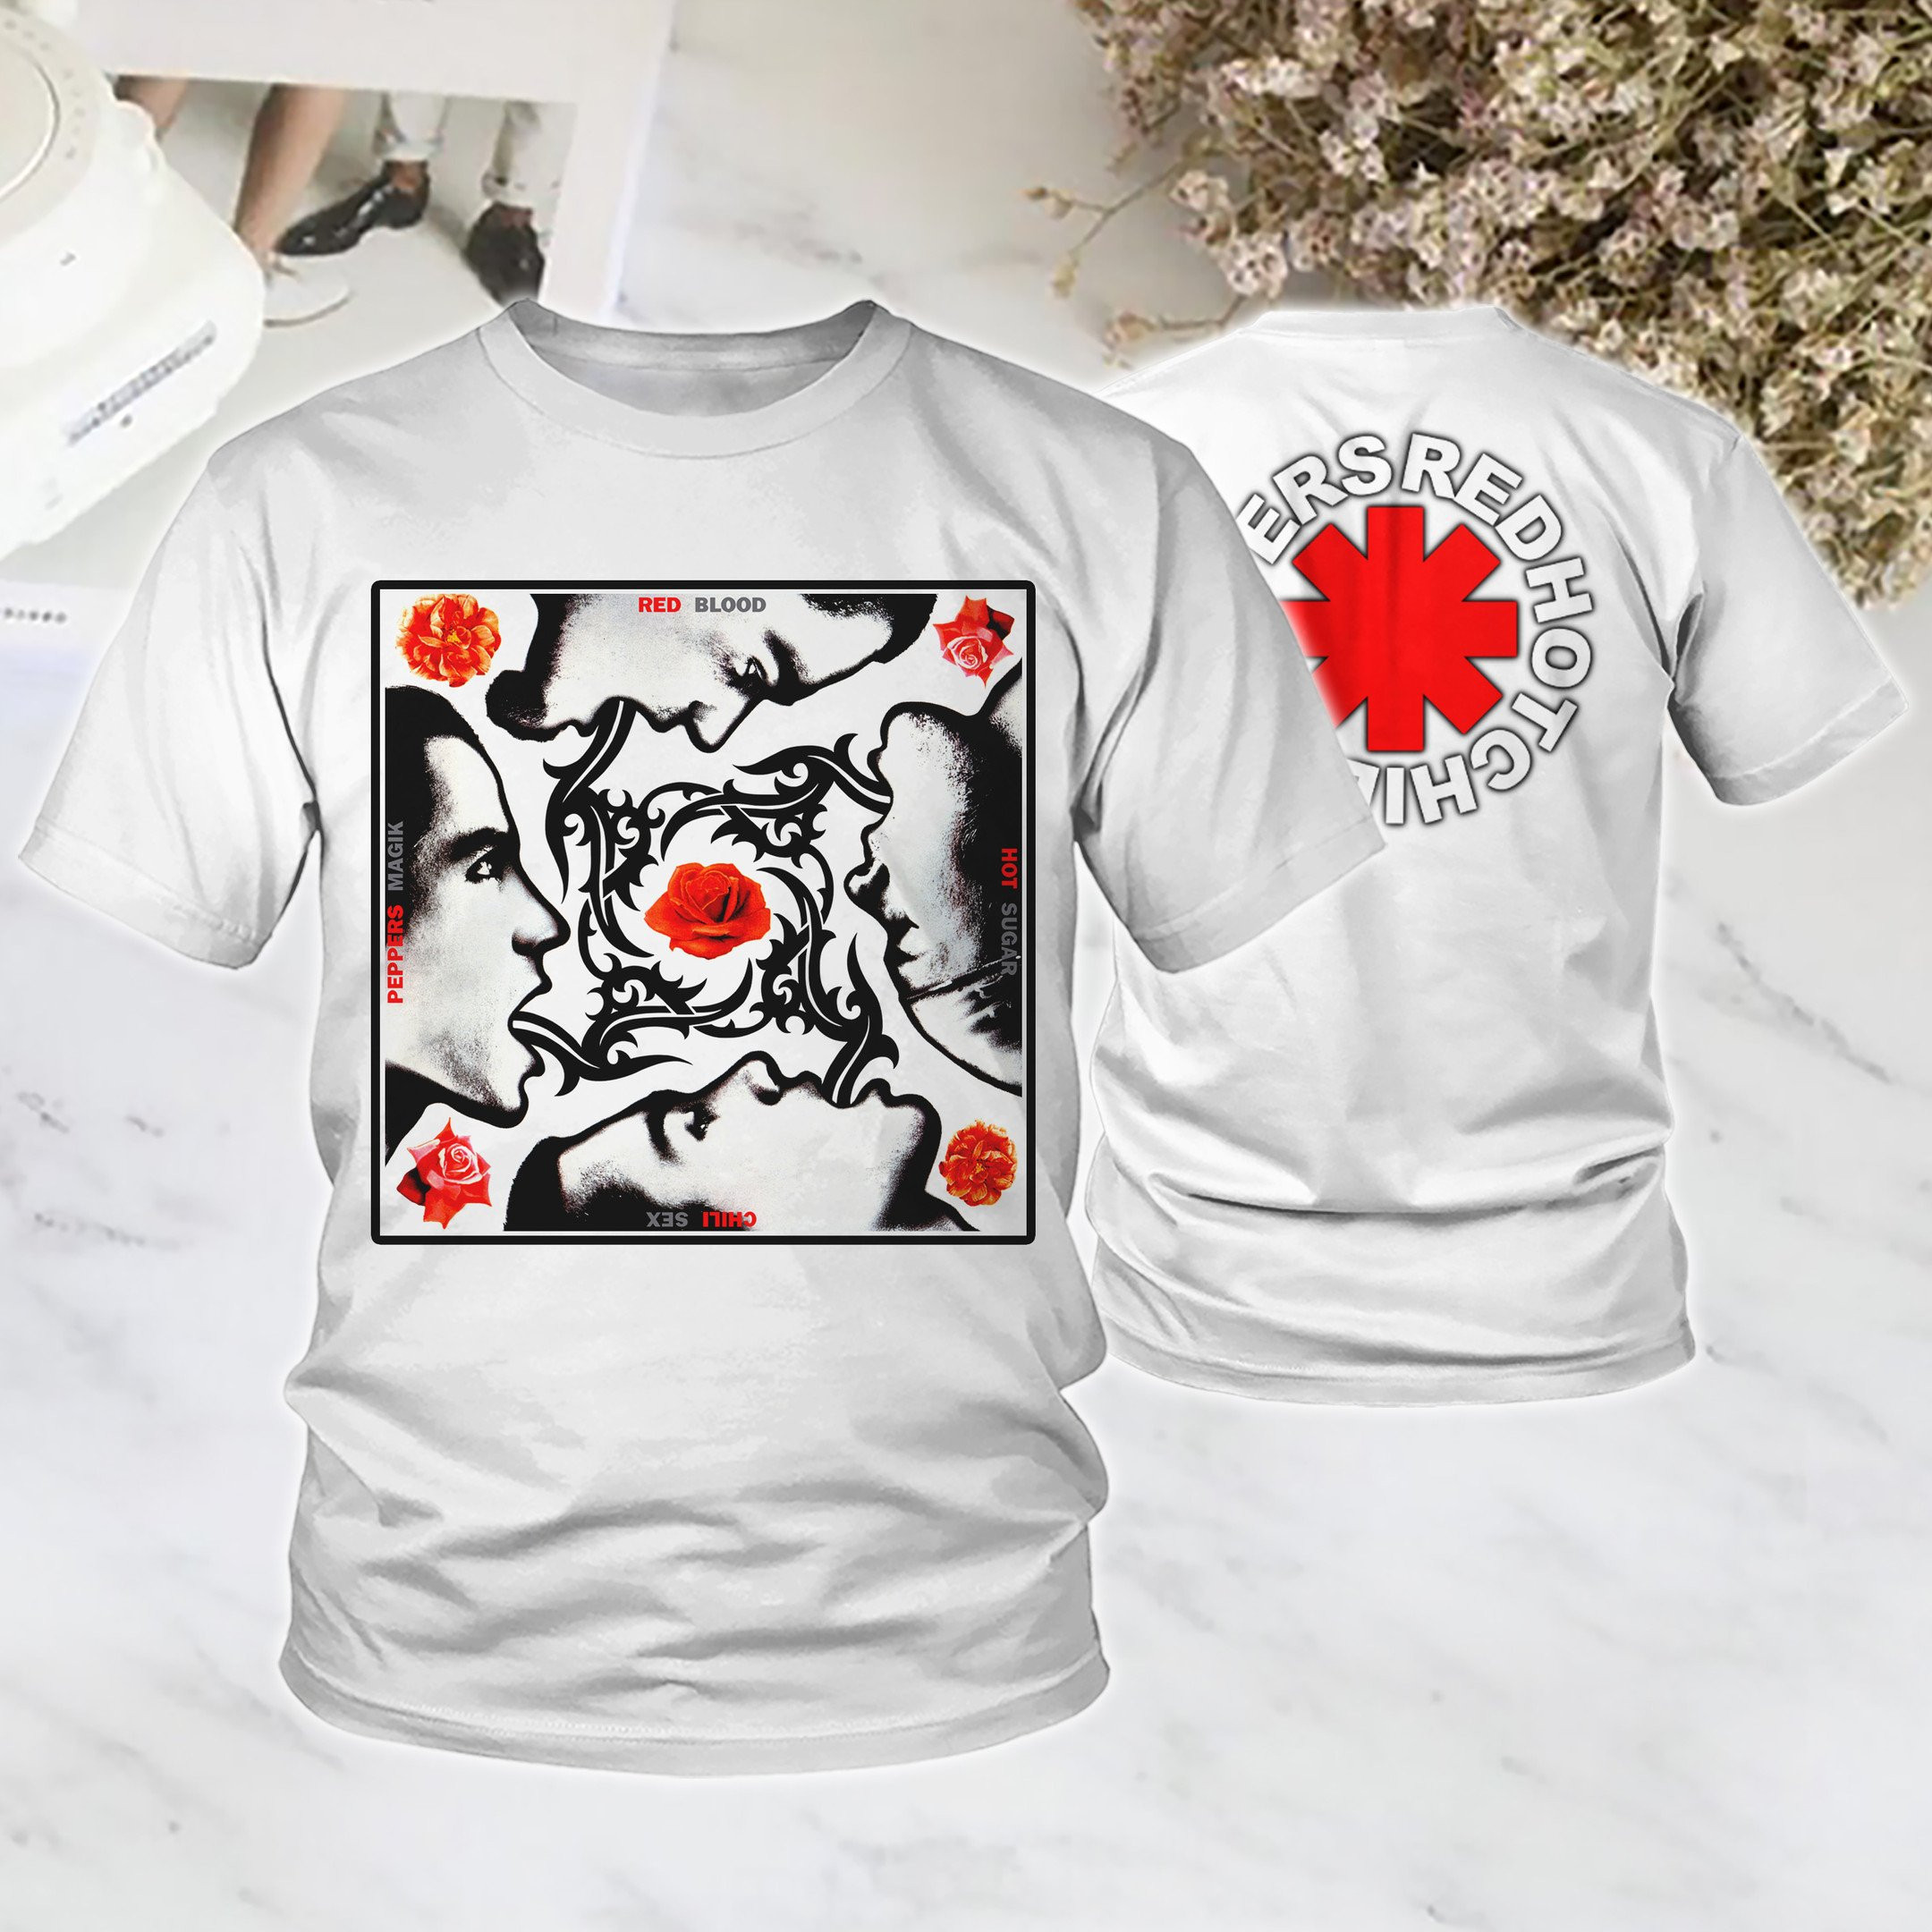 There are many different 3d shirts available - Check it out 132